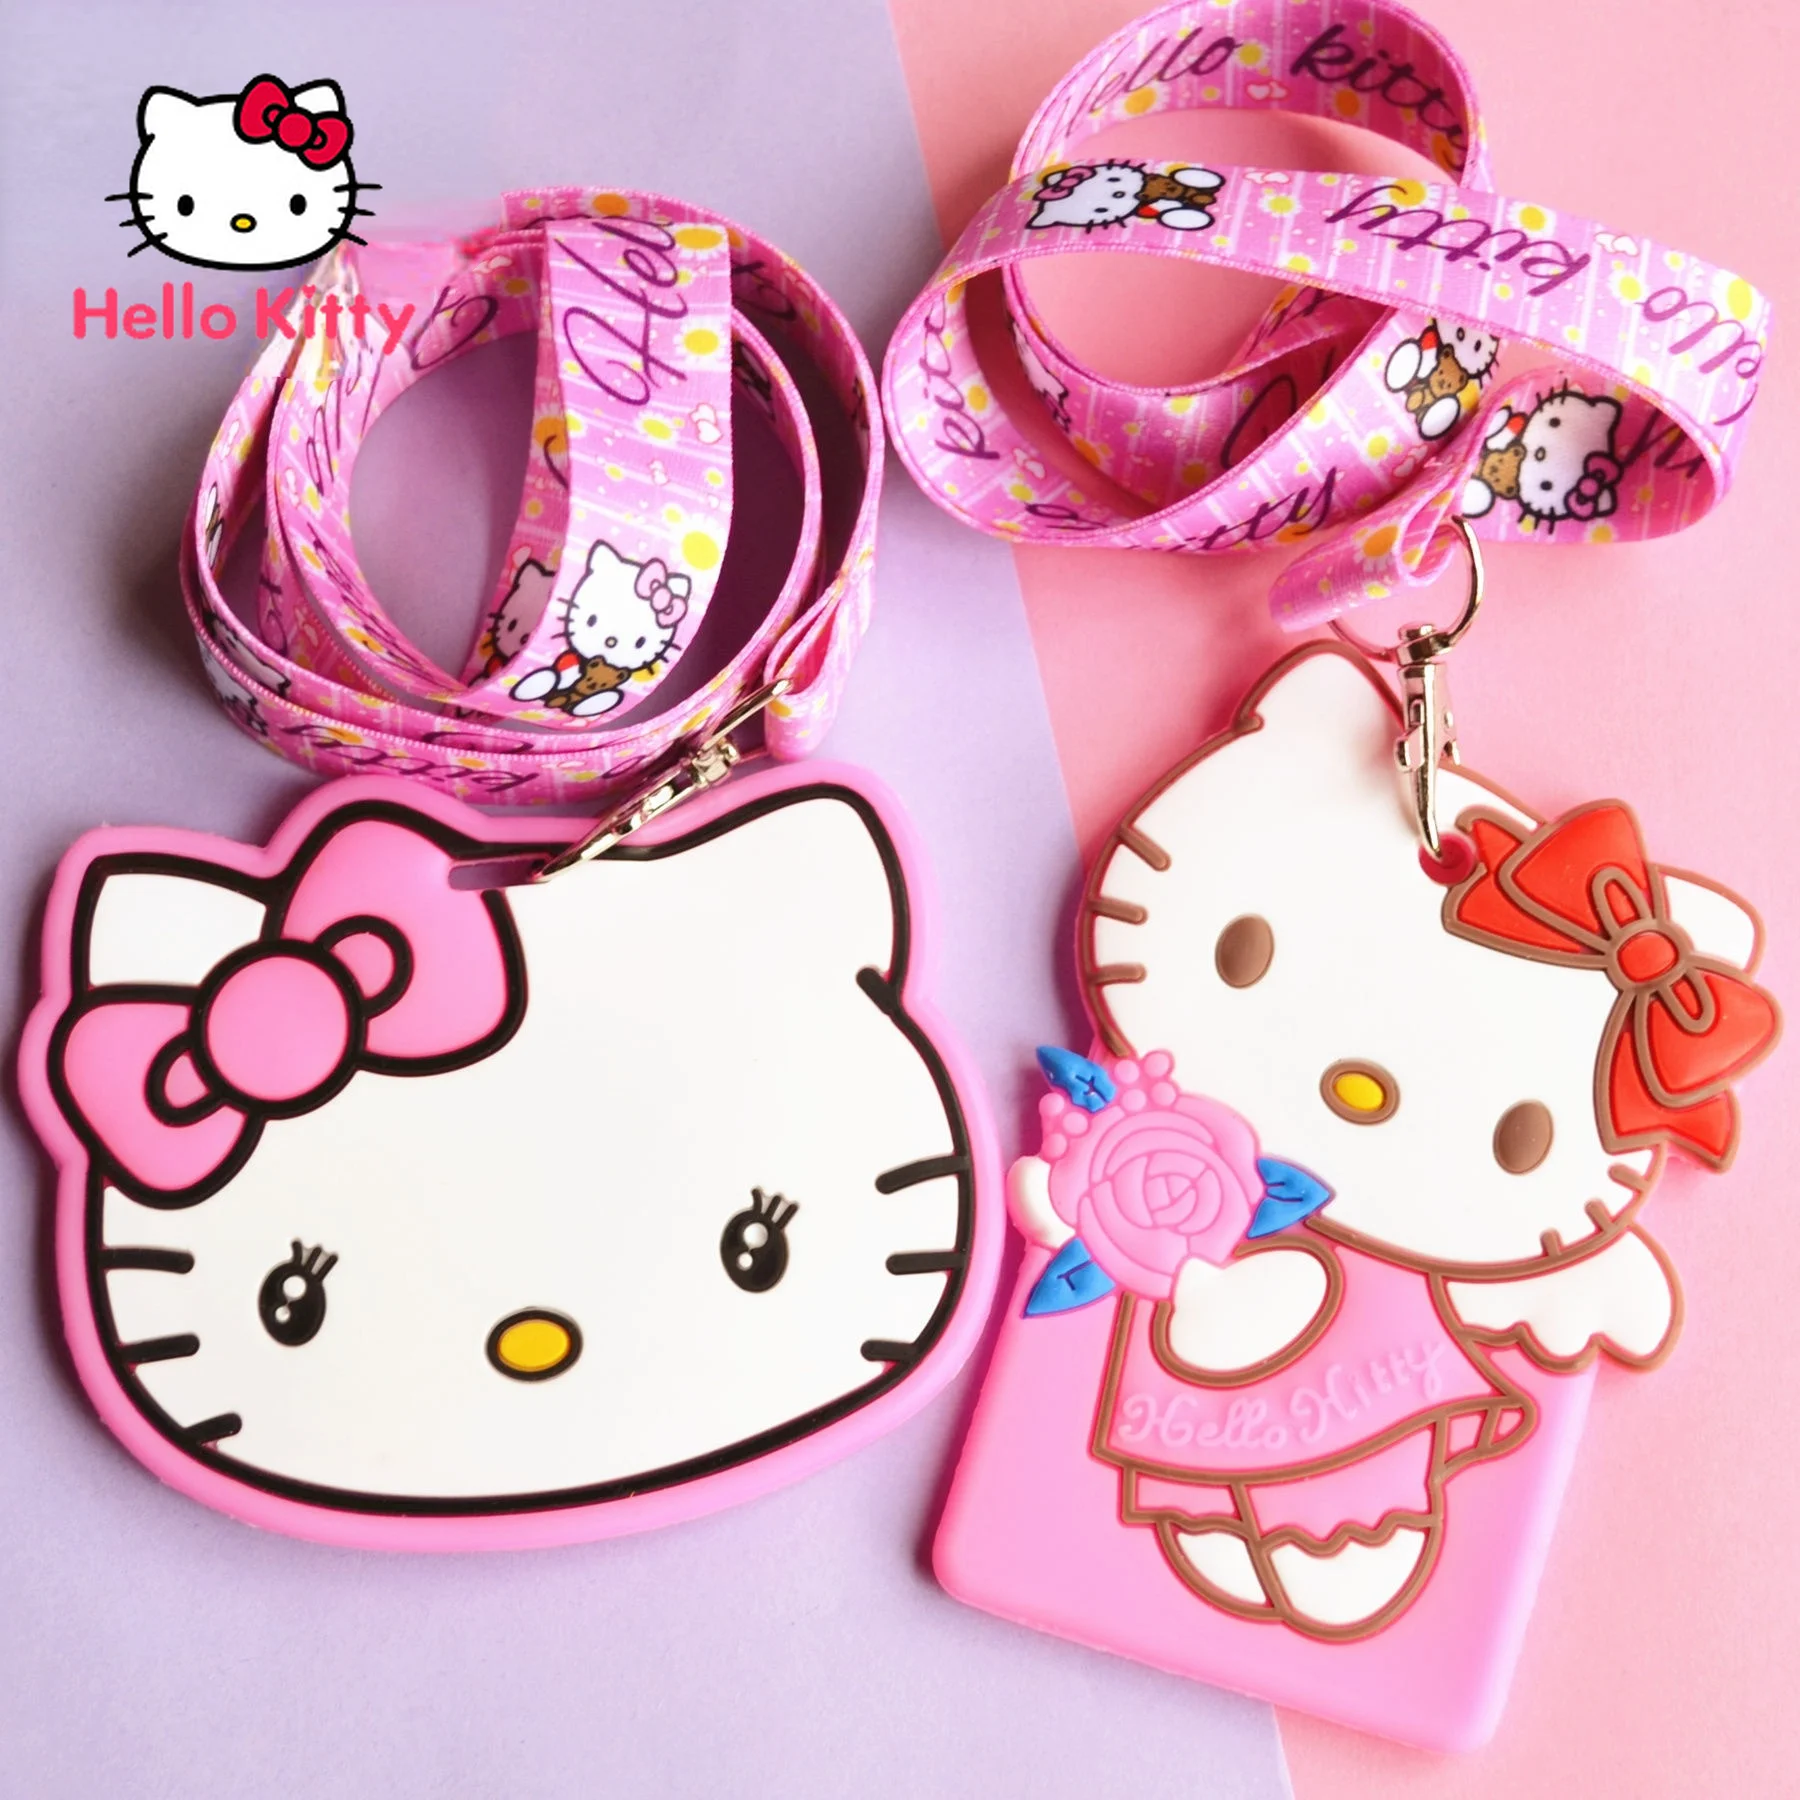 

TAKARA TOMY Hello Kitty Soft Silicone Cute Student Access Control Campus Card Holder with Lanyard Simple Portable Clip